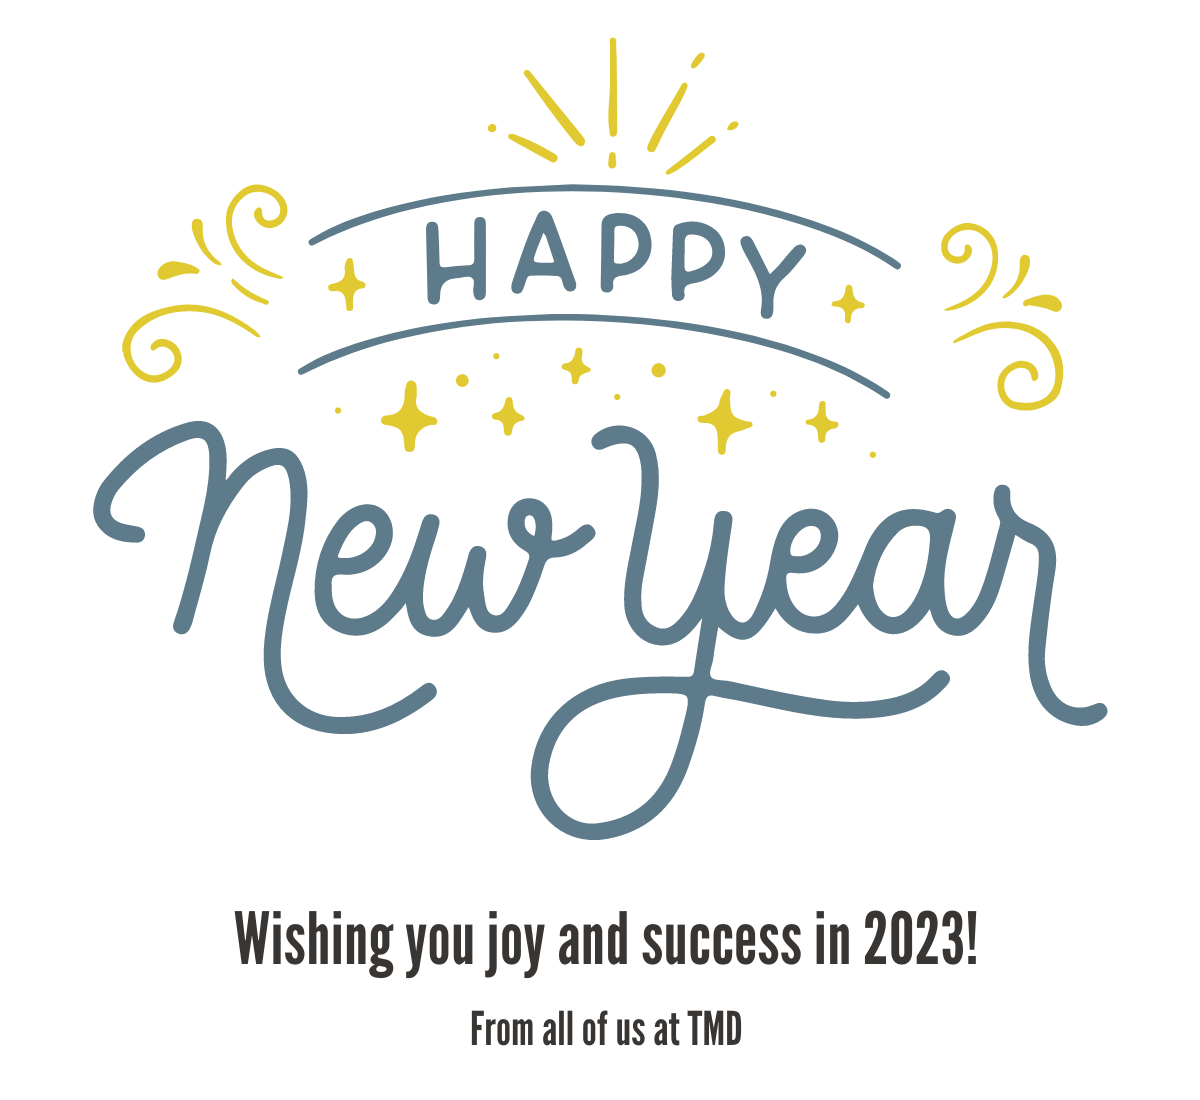 Infographic with text: Happy New Year! Wishing you joy and success in 2023!